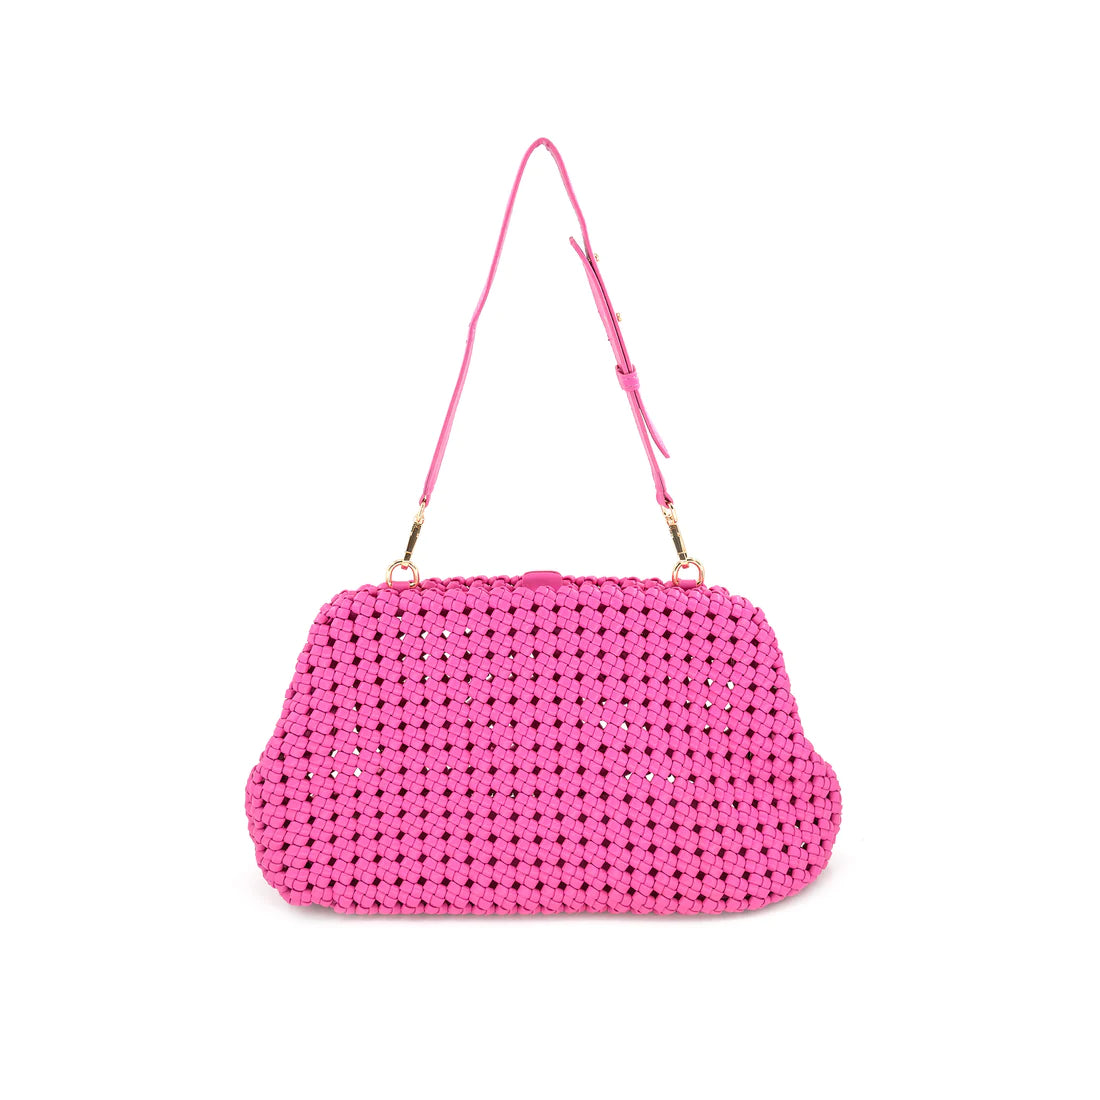 CSS - Braided Weave Clutch